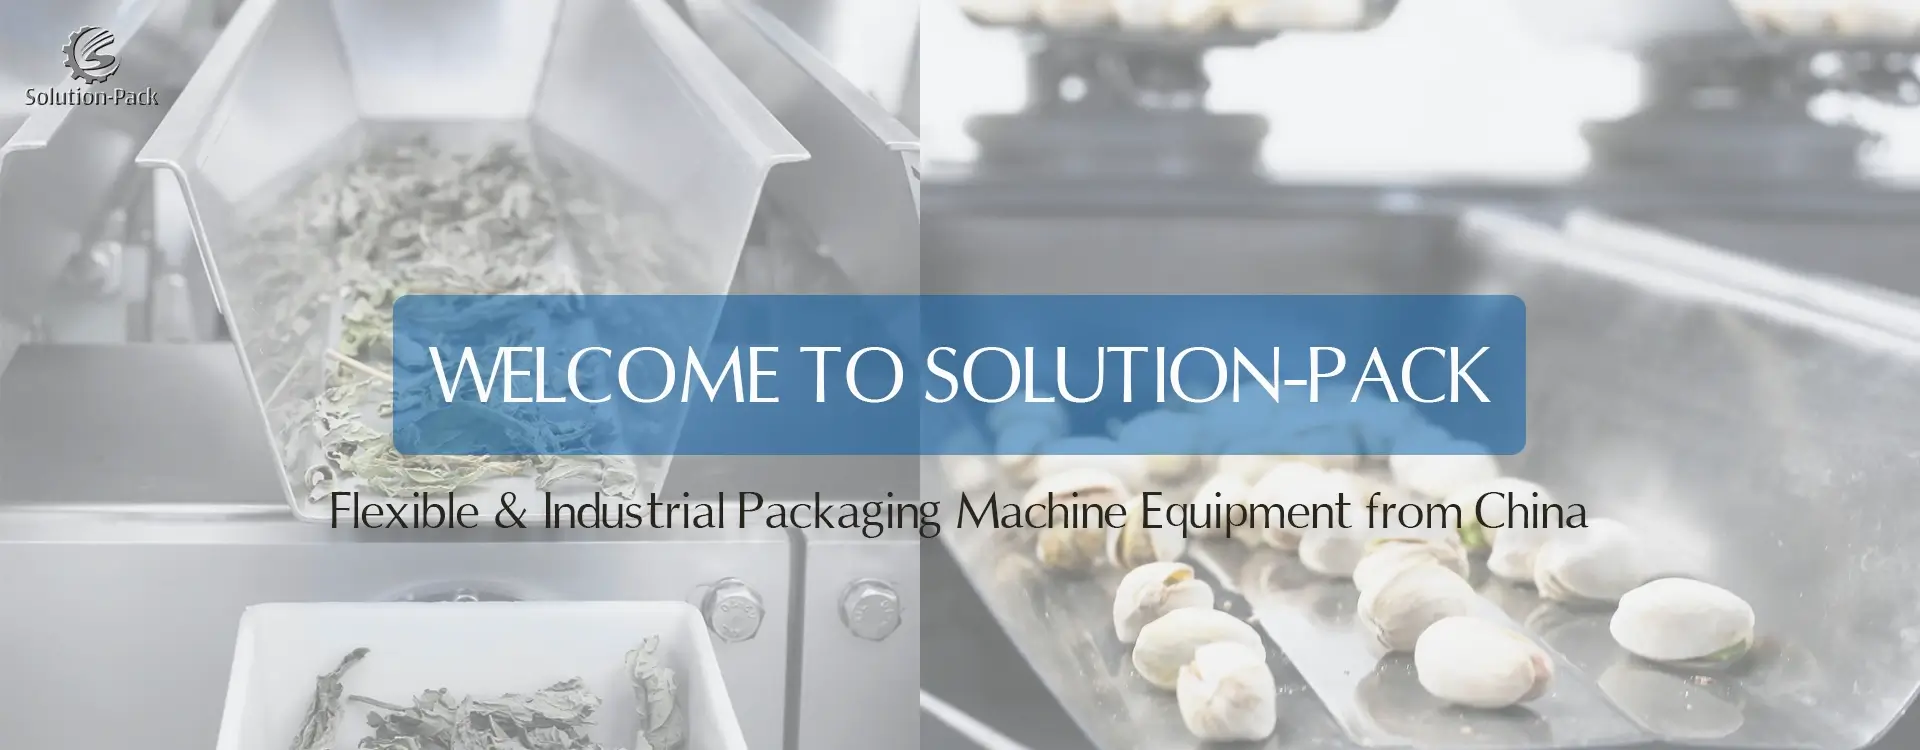 Model VSP780L Automatic Vertical Packaging Machine Unit | Solution-Pack (Middle Banner Picture)